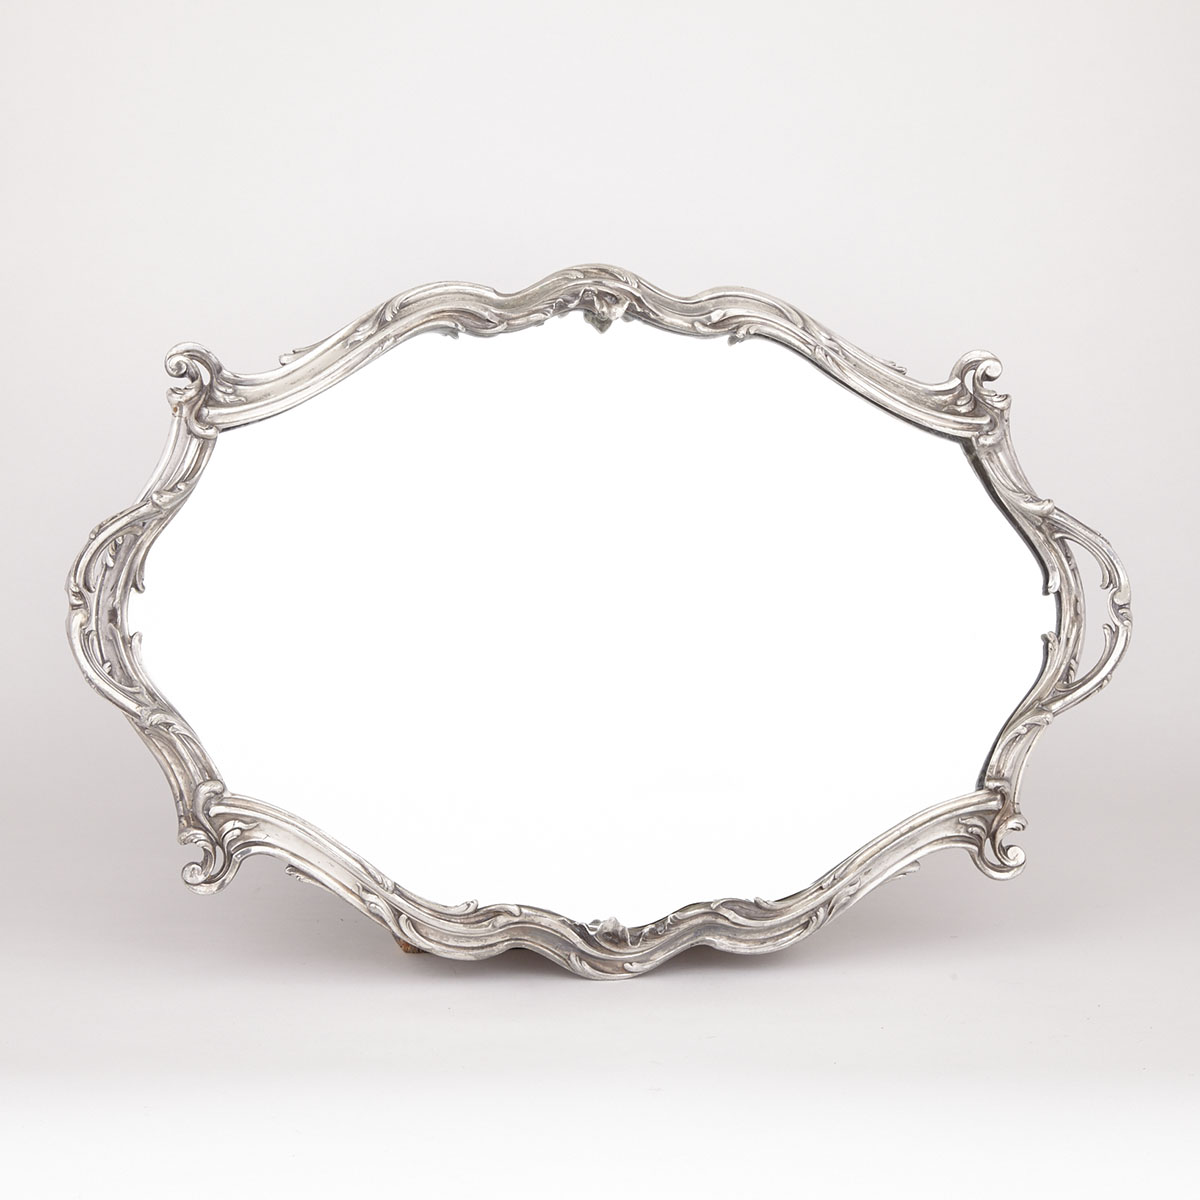 French Silver Plated Two Handled Mirror Plateau, Victor Saglier, Paris, c.1900